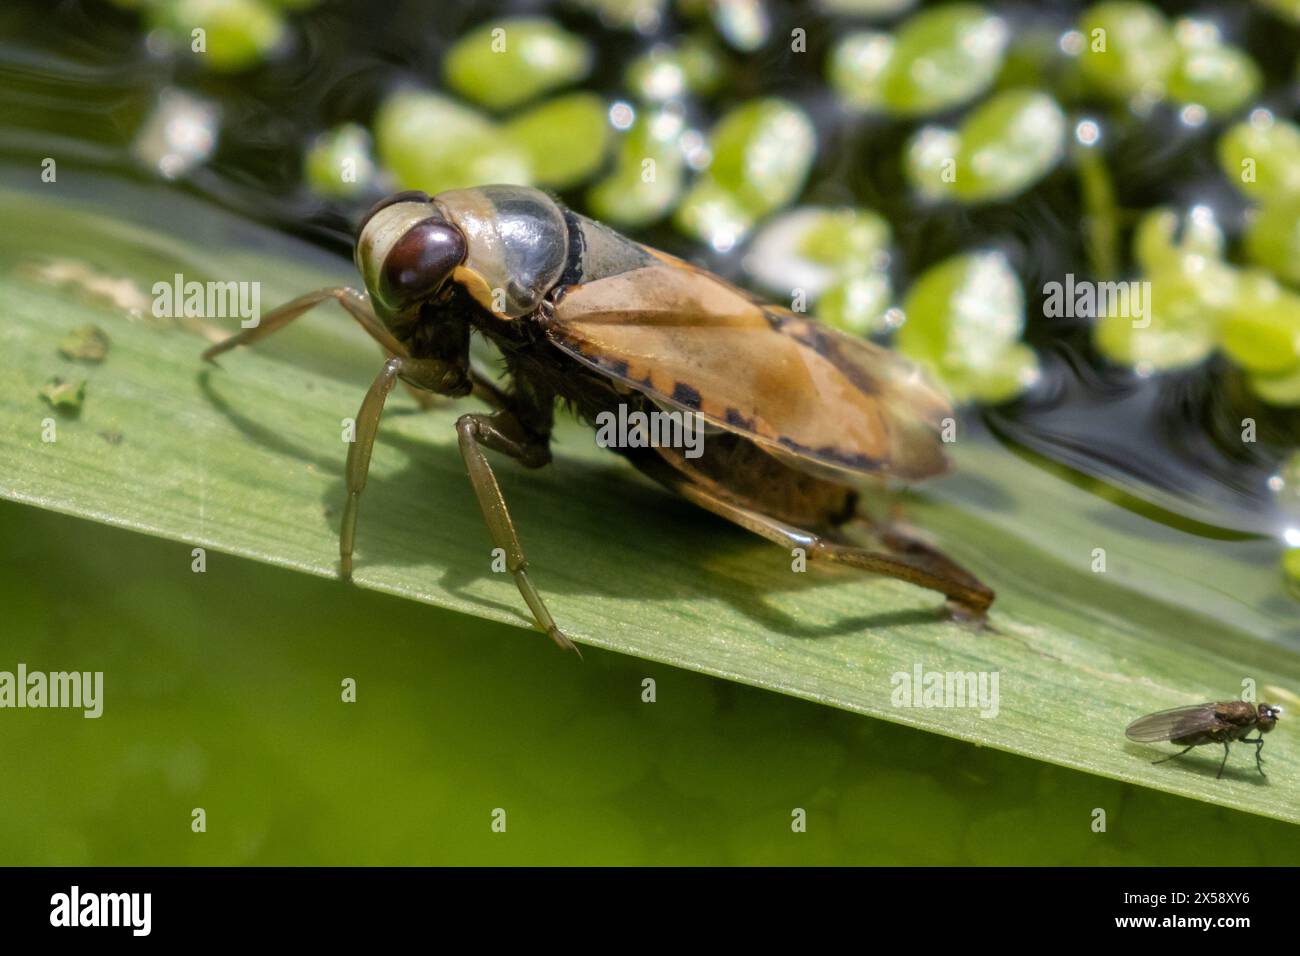 Common backswimmer, Notonecta glauca, aquatic insect found cleaning itself in a garden pond. Sussex, UK Stock Photo